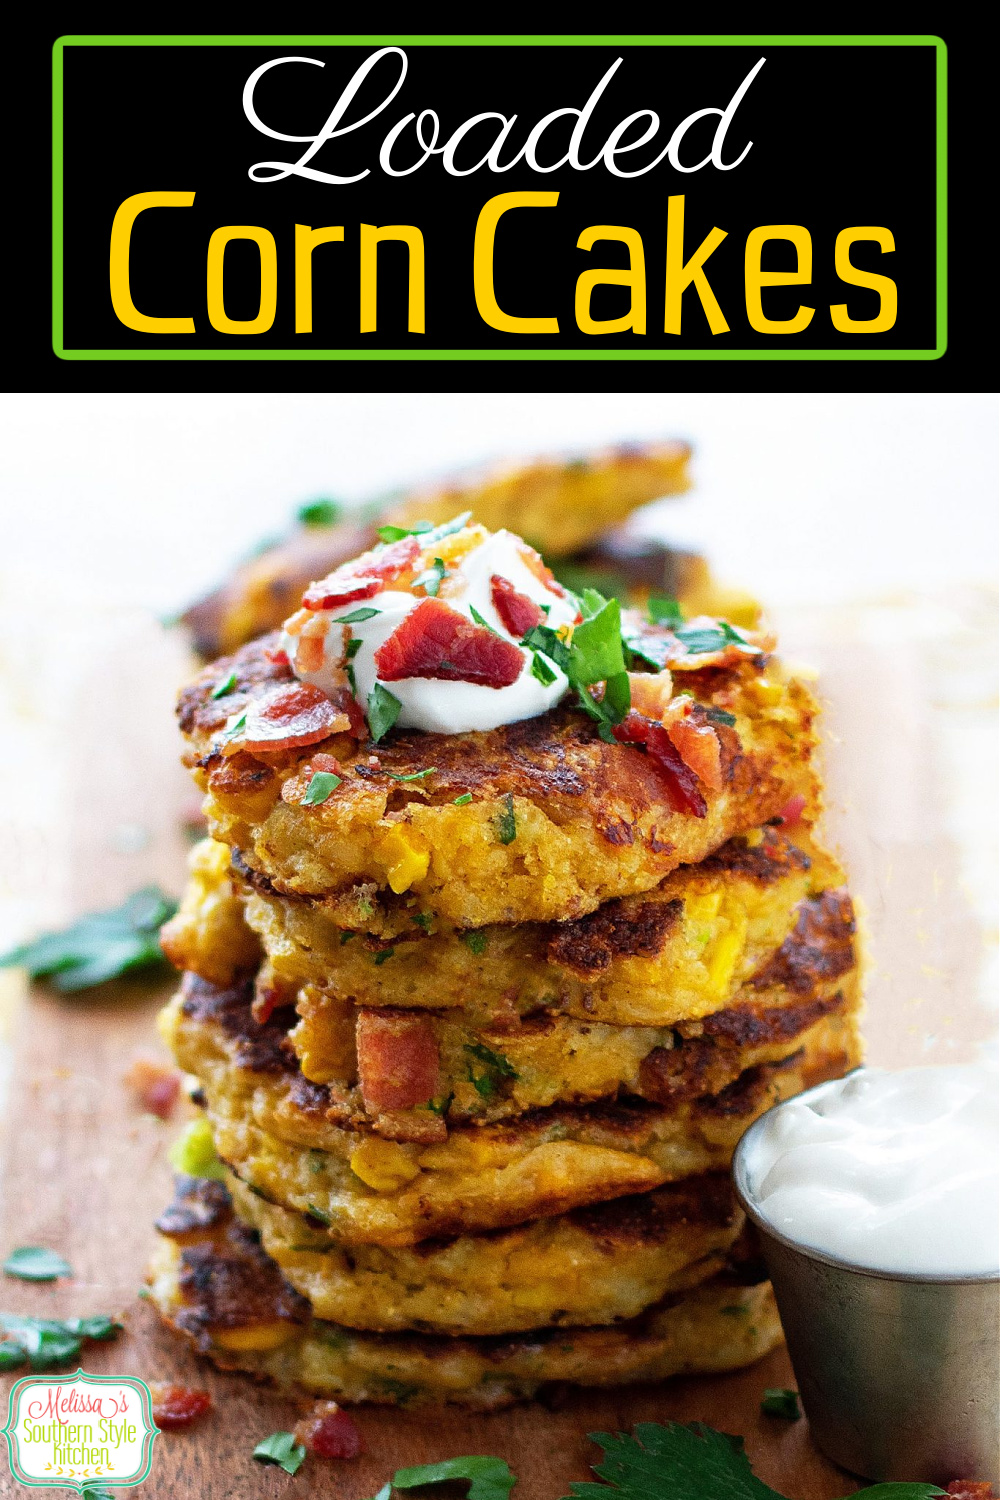 These Loaded Corn Cakes are filled with sweet corn, cheese and bacon #corncakes #loadedcorncakes #cornrecipes #sidedishrecipes #easycorncakes #summersides #brunch #dinner #southern recipes via @melissasssk